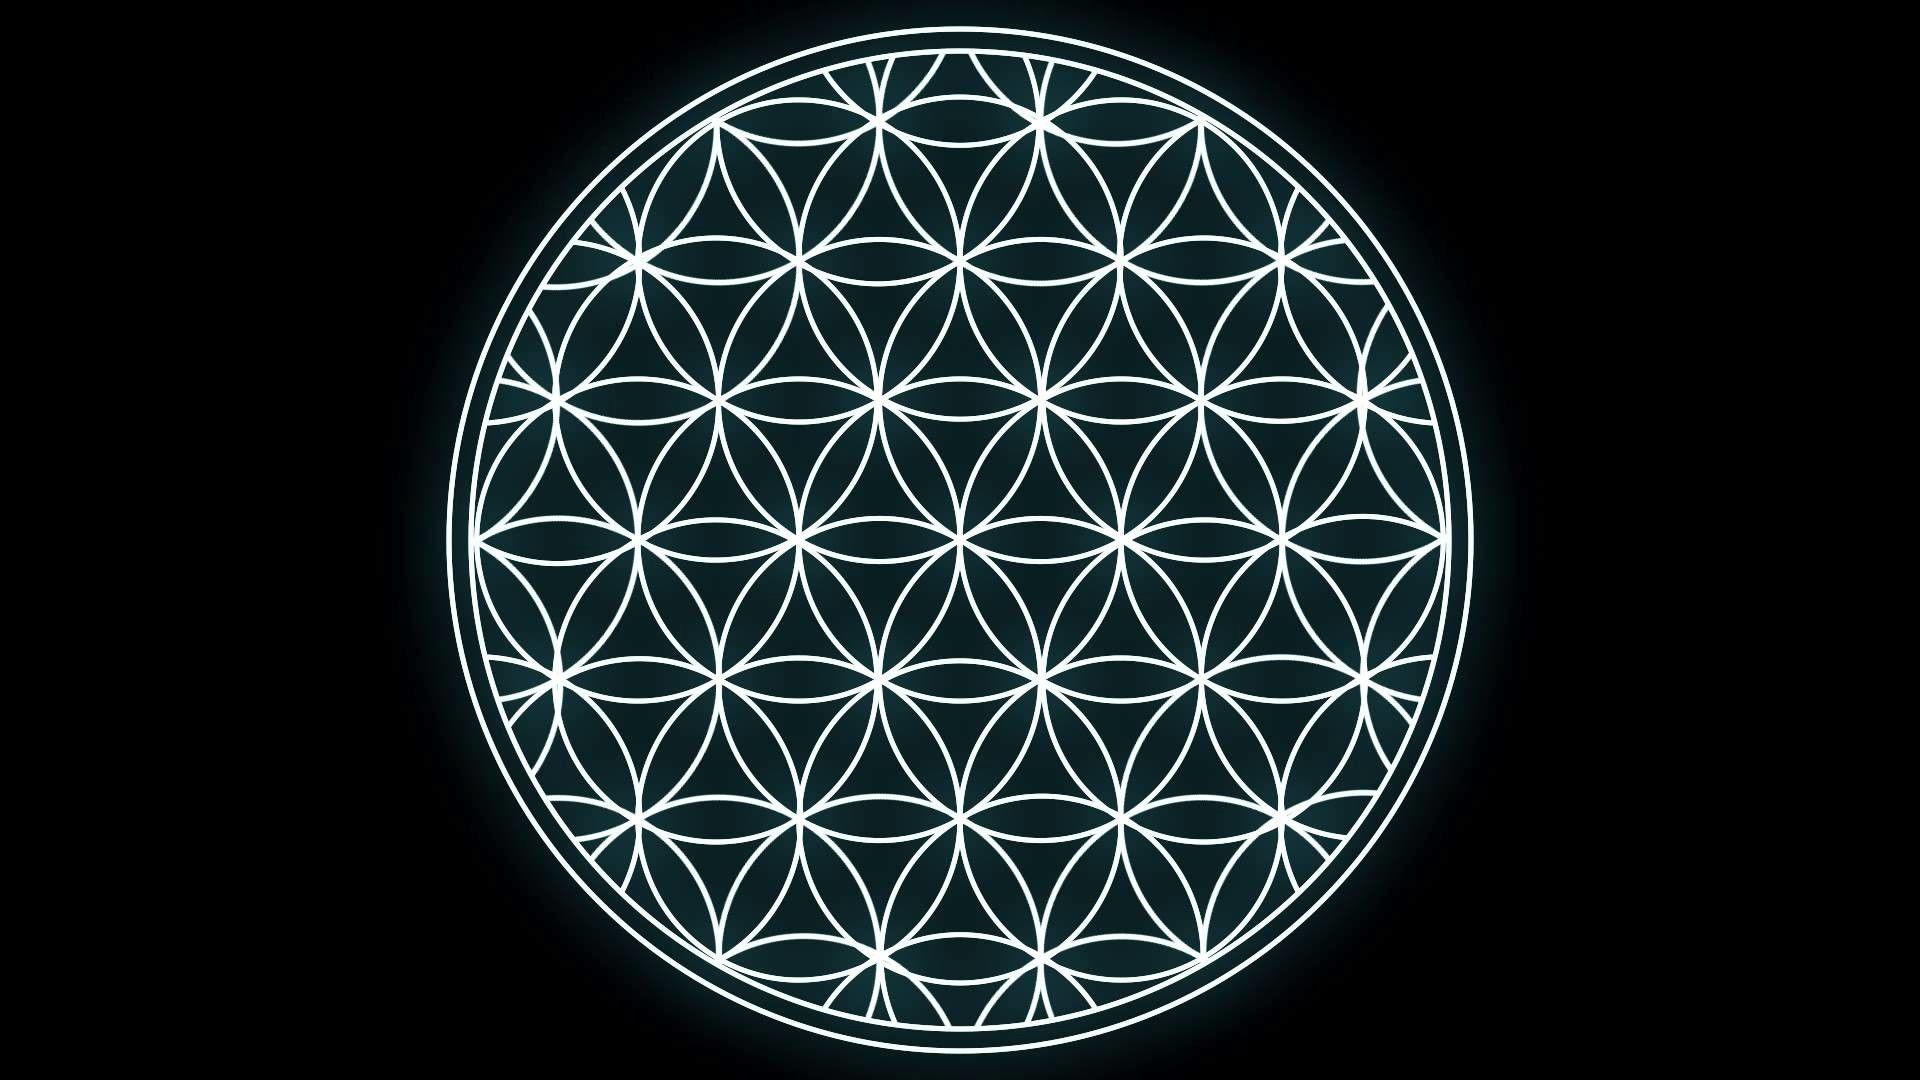 Flower Of Life Wallpapers Top Free Flower Of Life Backgrounds Wallpaperaccess The fibonacci spiral and many other forms and patterns we talk about in sacred geometry arise from the flower of life, which is seen as the basis for all other patterns in the universe. flower of life wallpapers top free